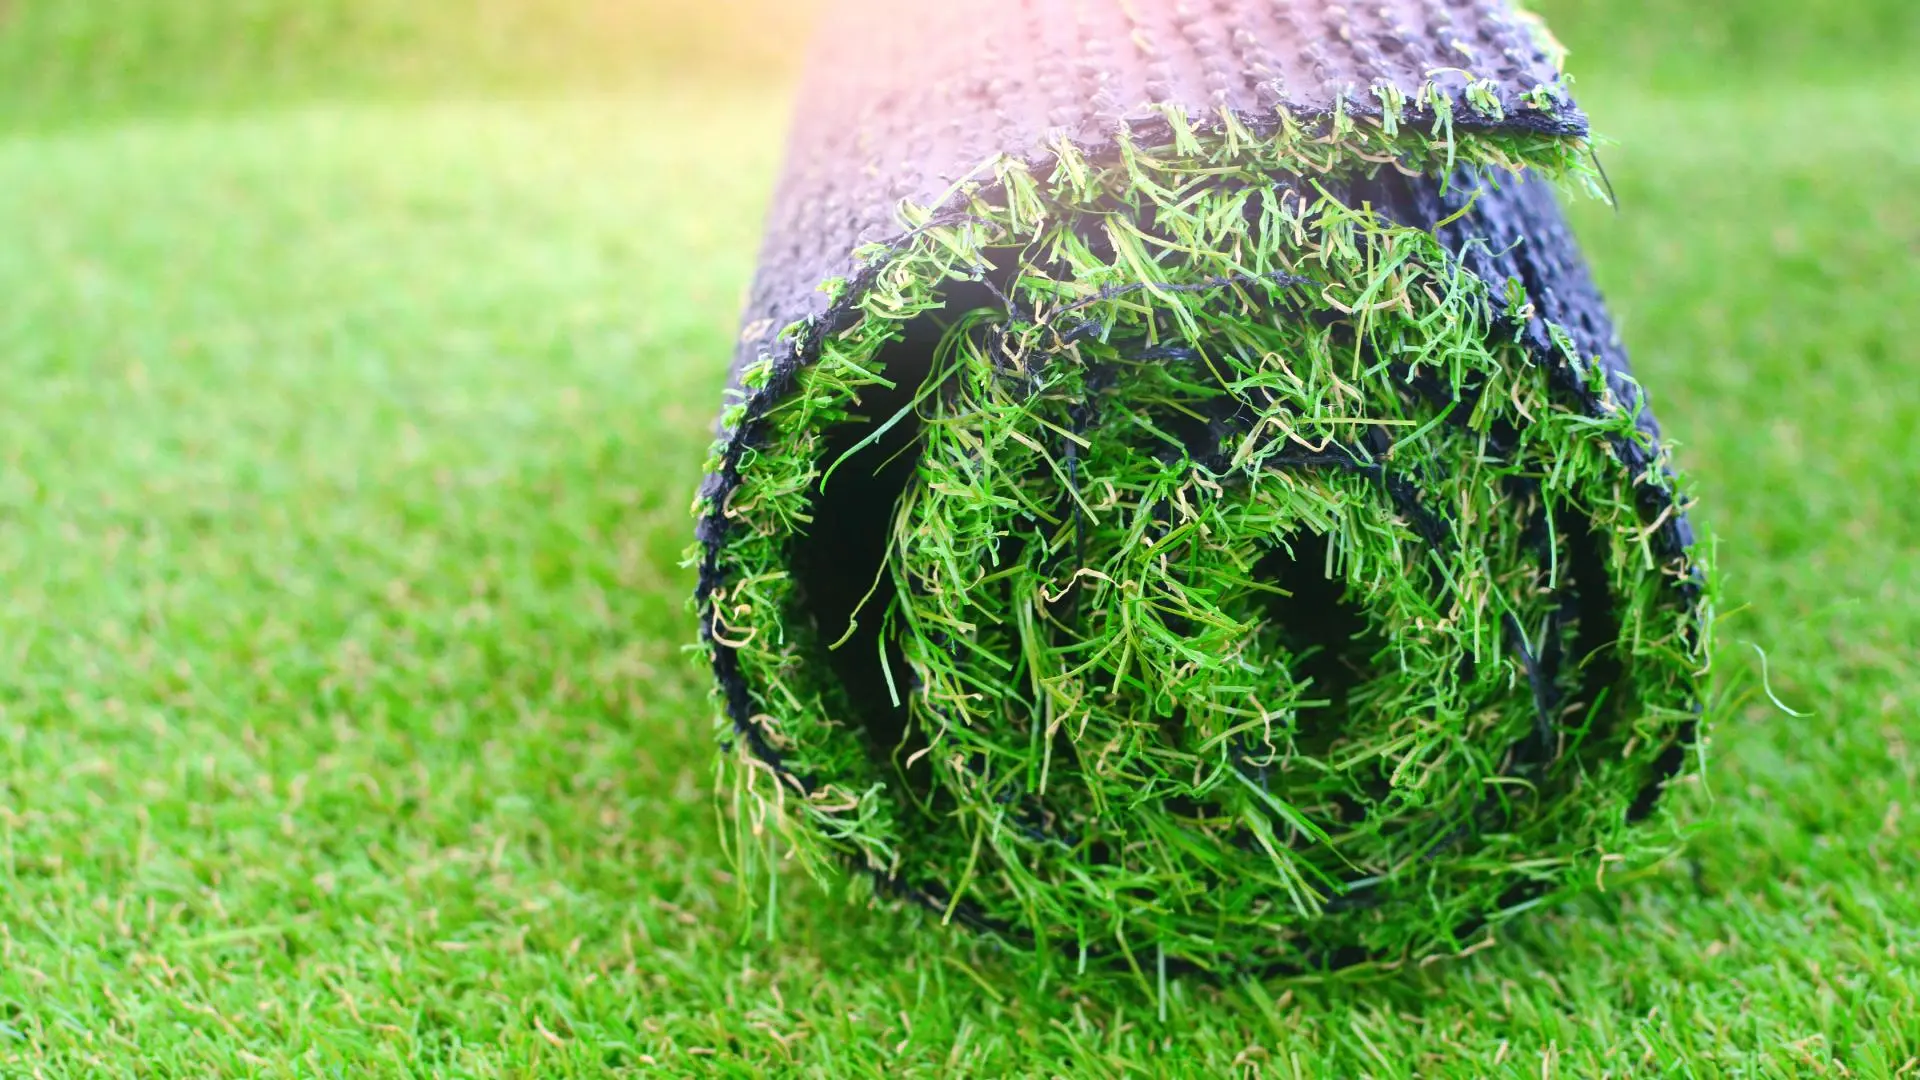 Get Inspired - 5 Great Places to Install Artificial Turf